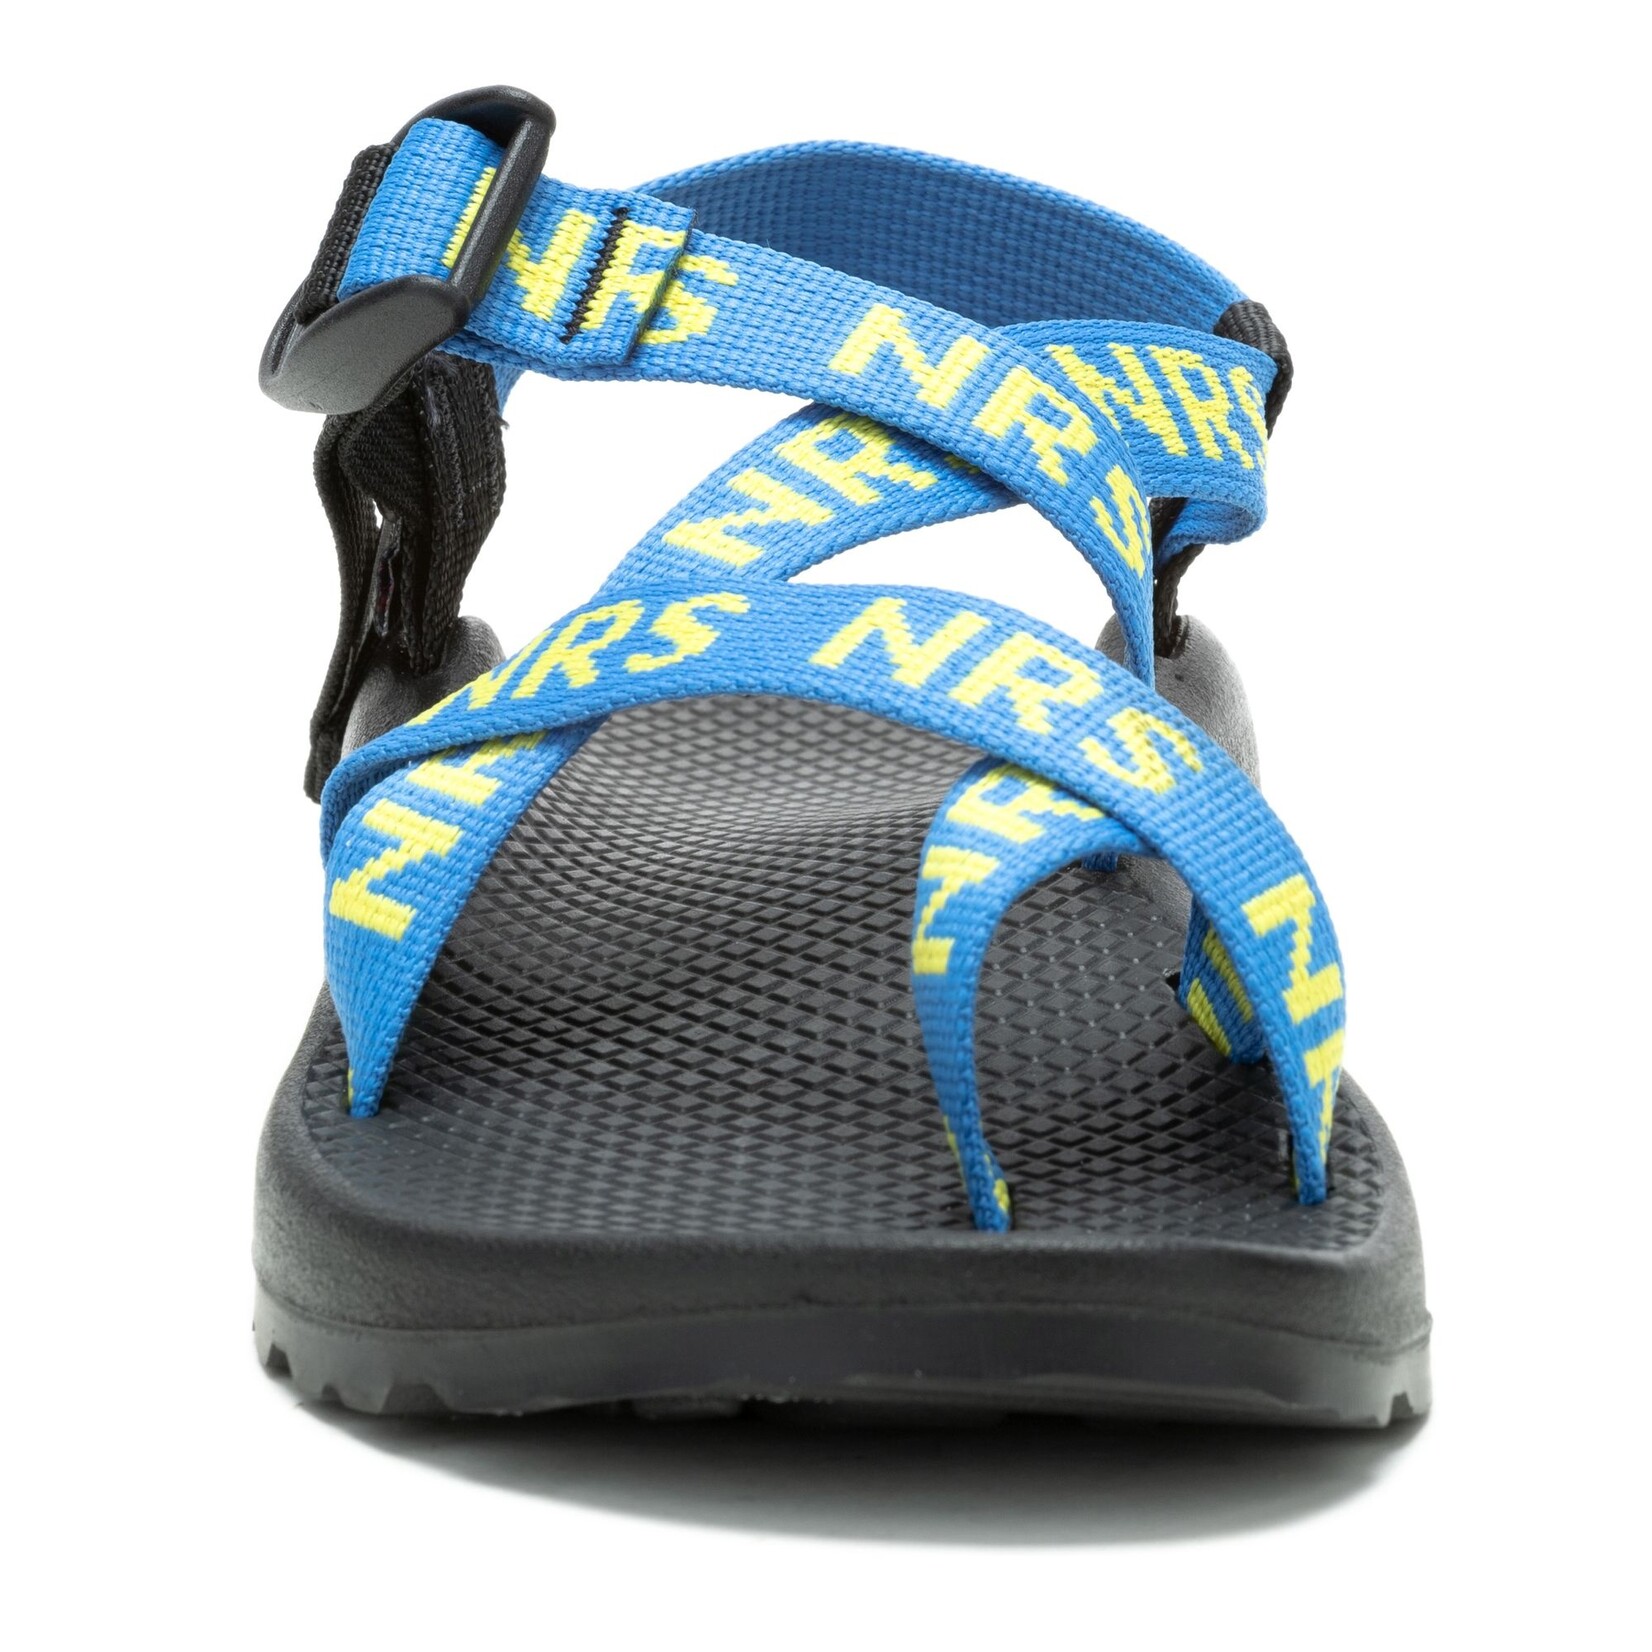 Chaco Chaco Women's Z/2 Classic with NRS Strap Webbing - Closeout